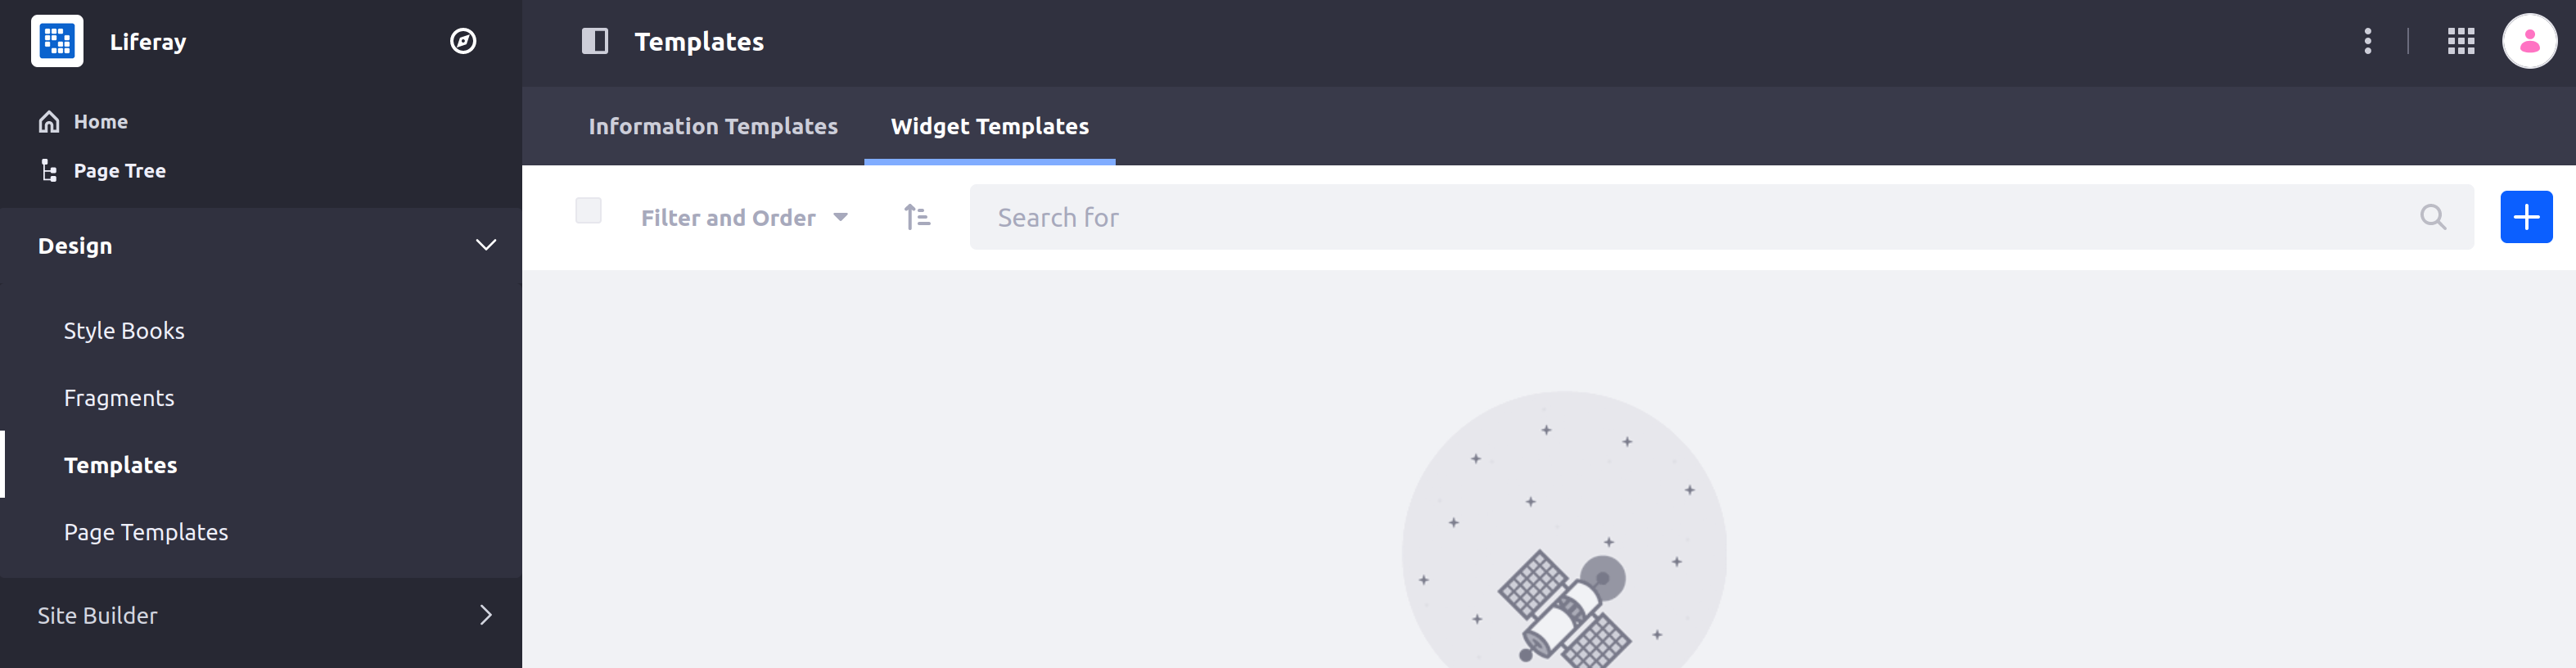 Access the Widget Templates page from the Templates application.